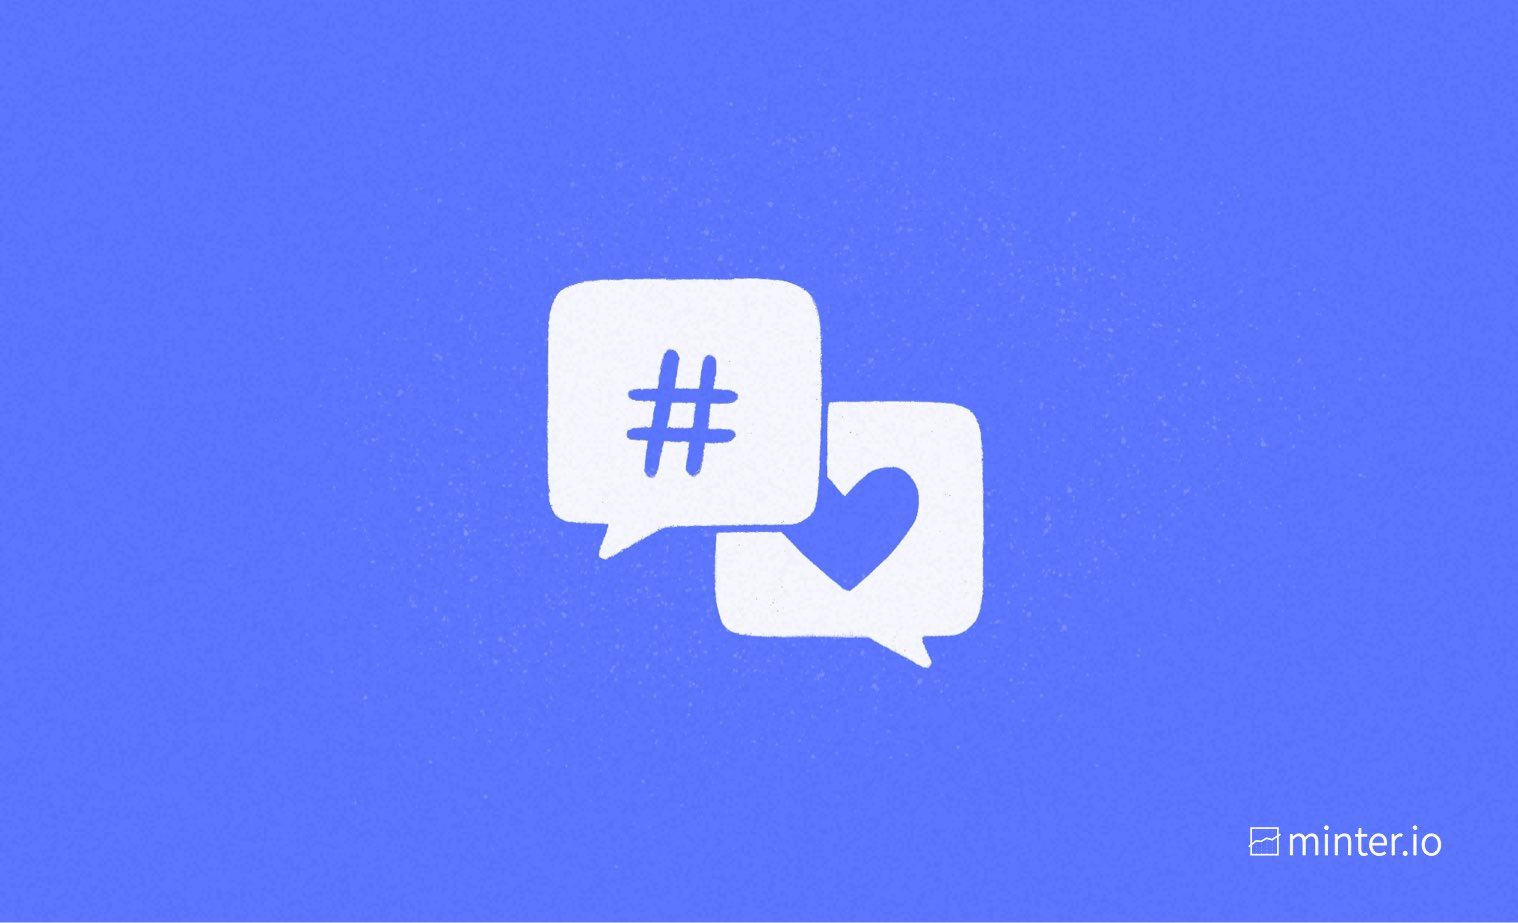 10 ways to effectively use hashtags on Twitter